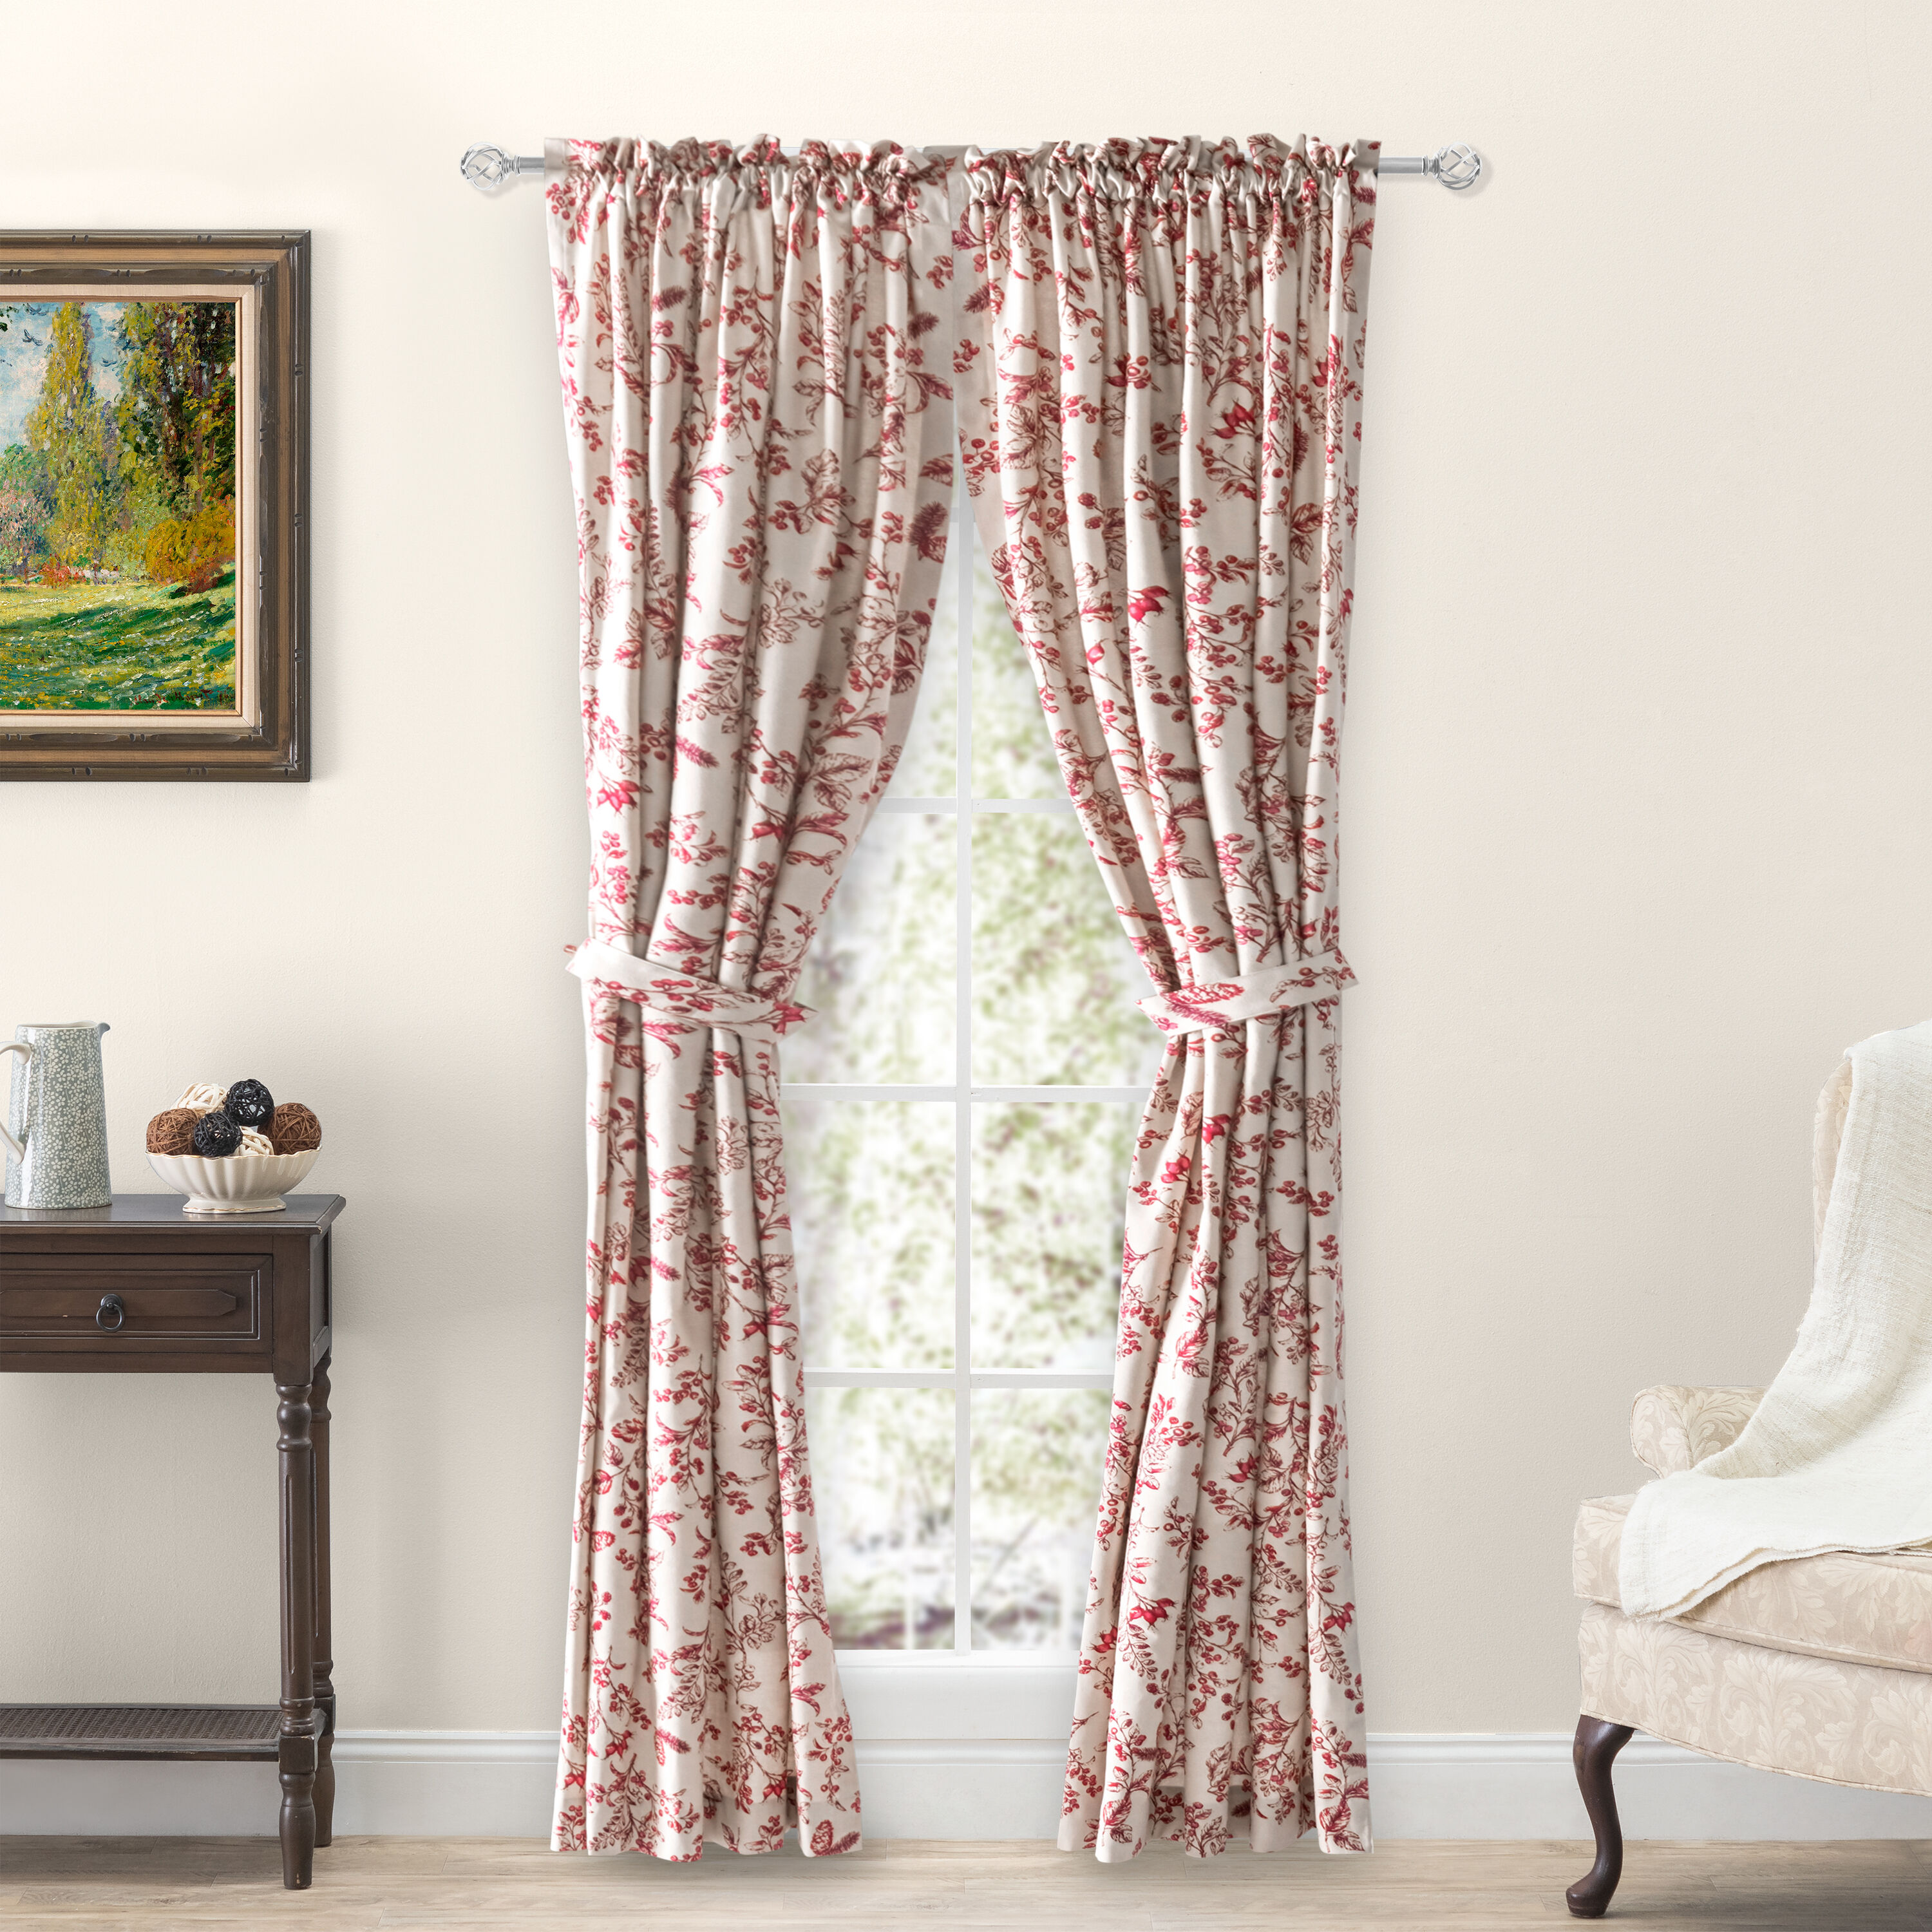 Curtains, Pole & Accessories  Vintage Floral Eyelet Curtains - Teal